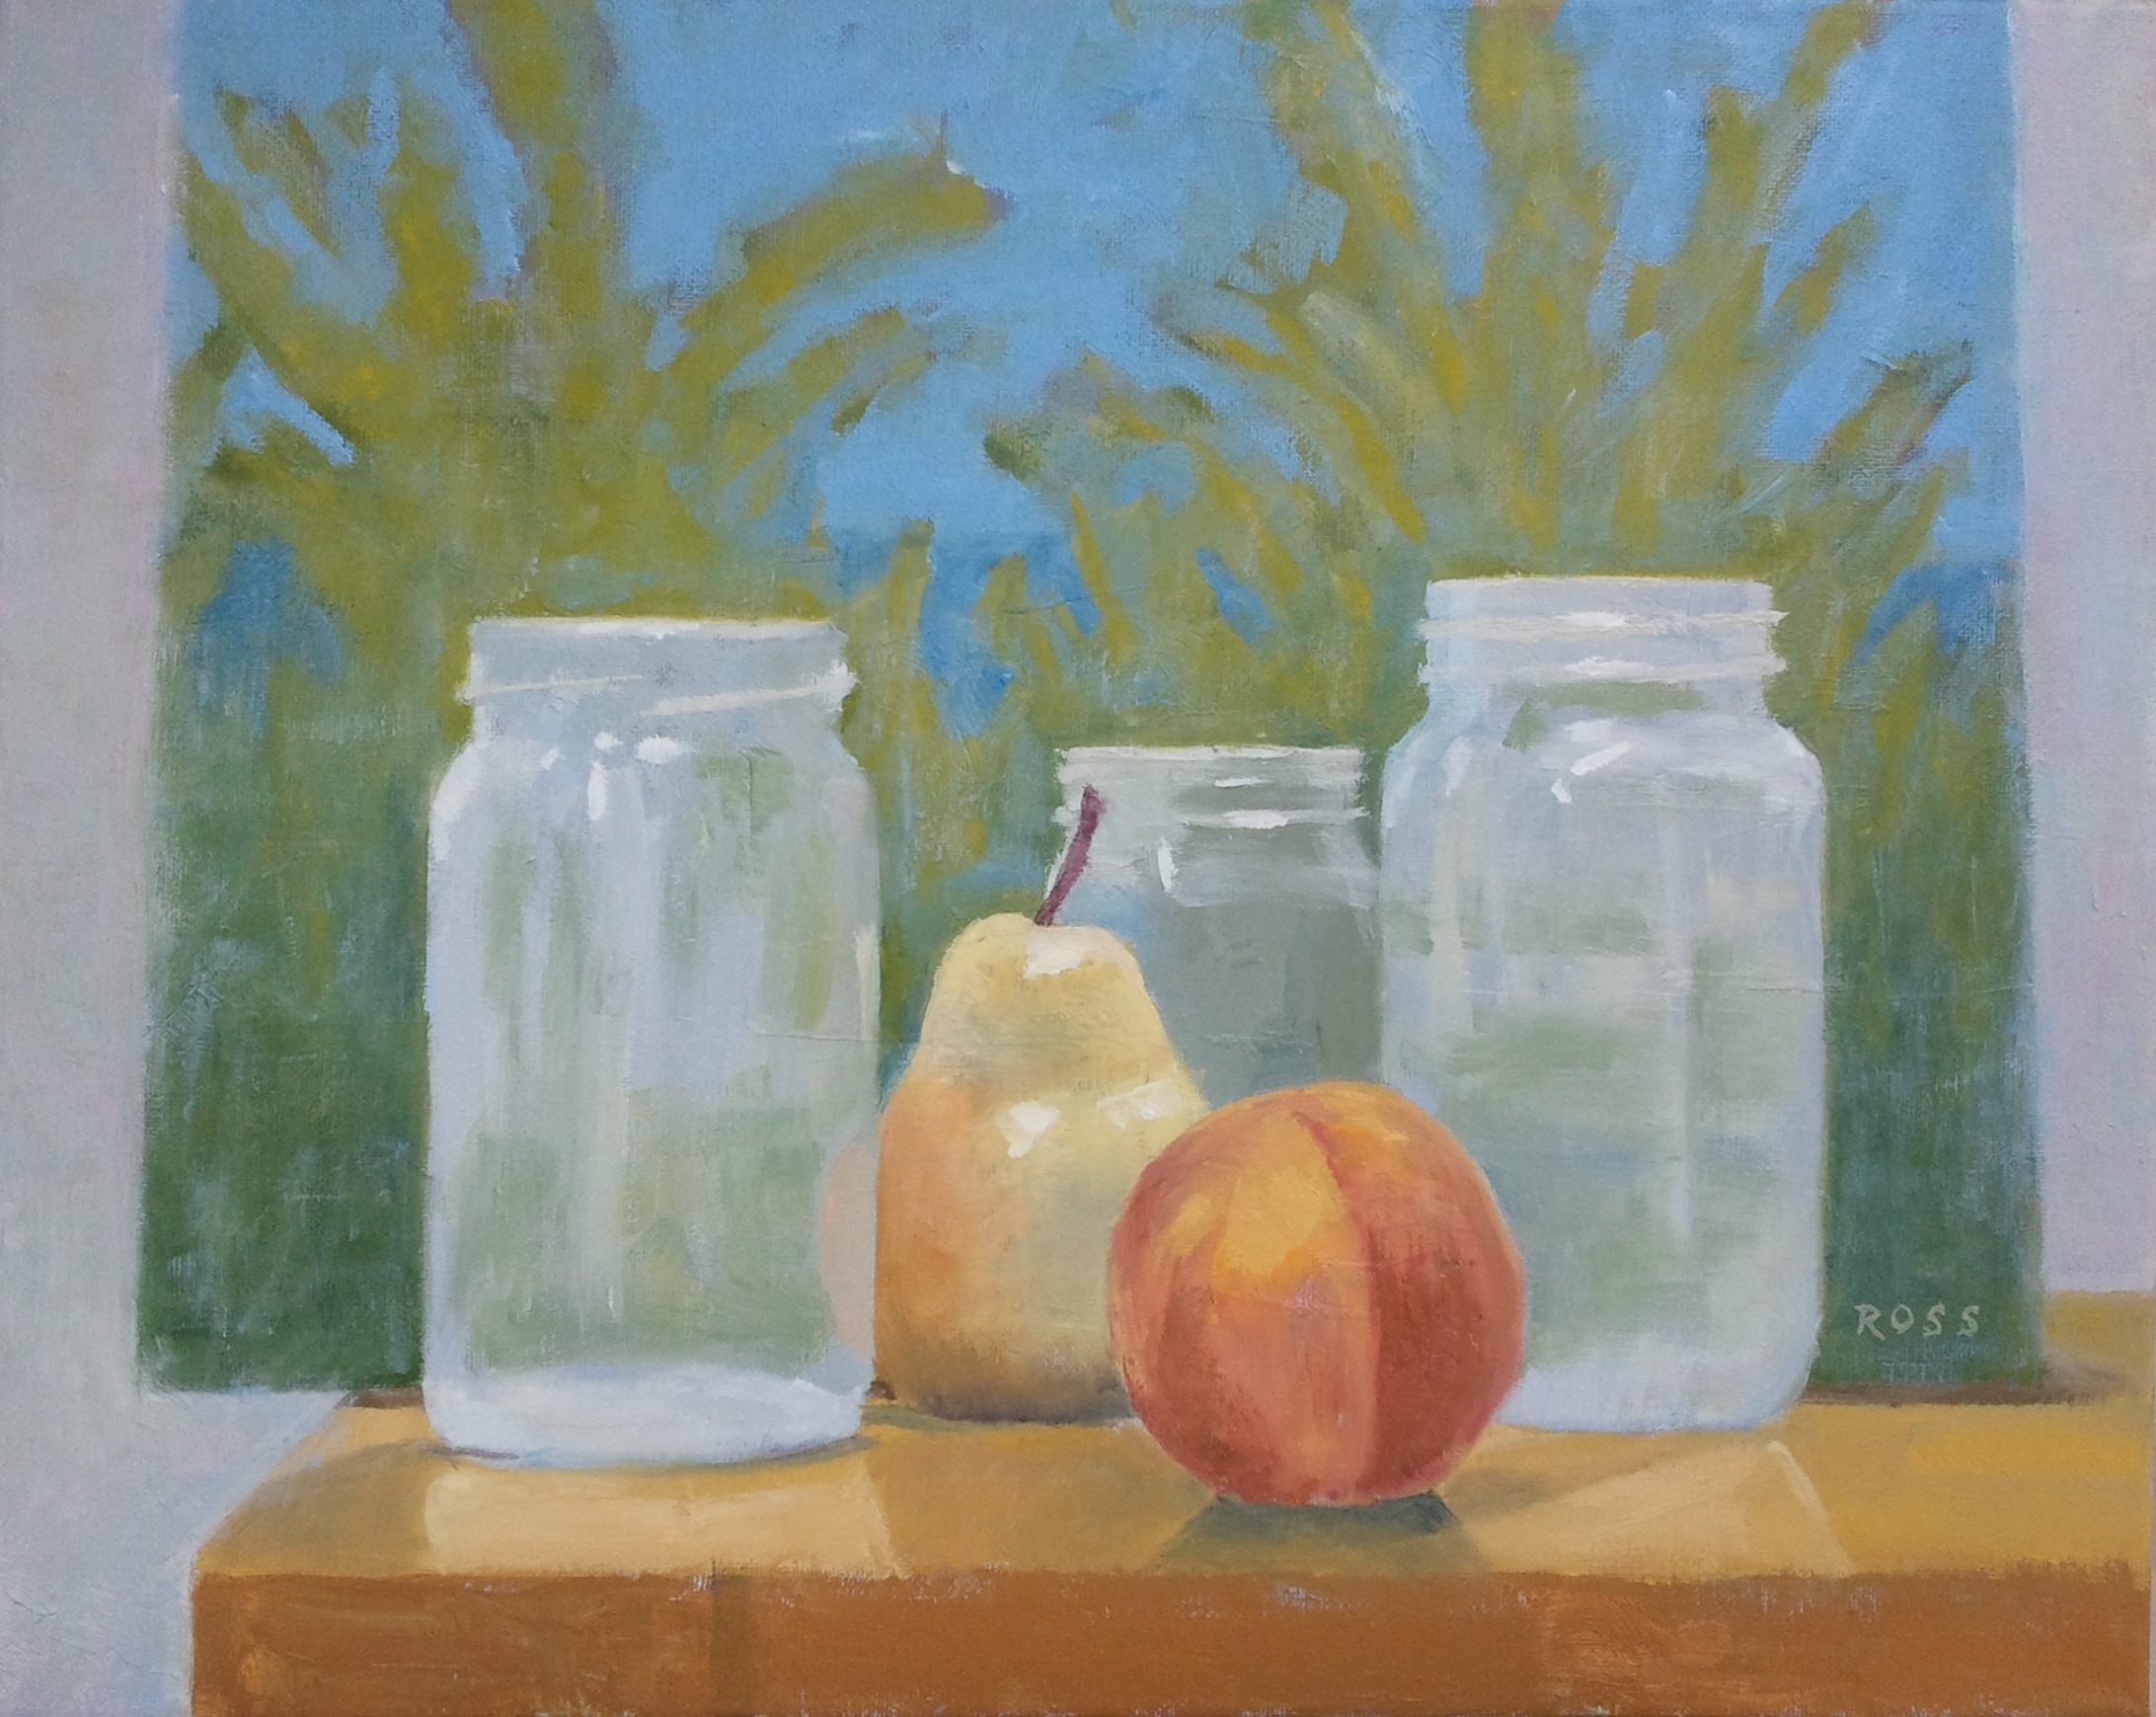  "Still Life&nbsp;with Jars, Fruit and Painting," 16"x20", oil on canvas. 